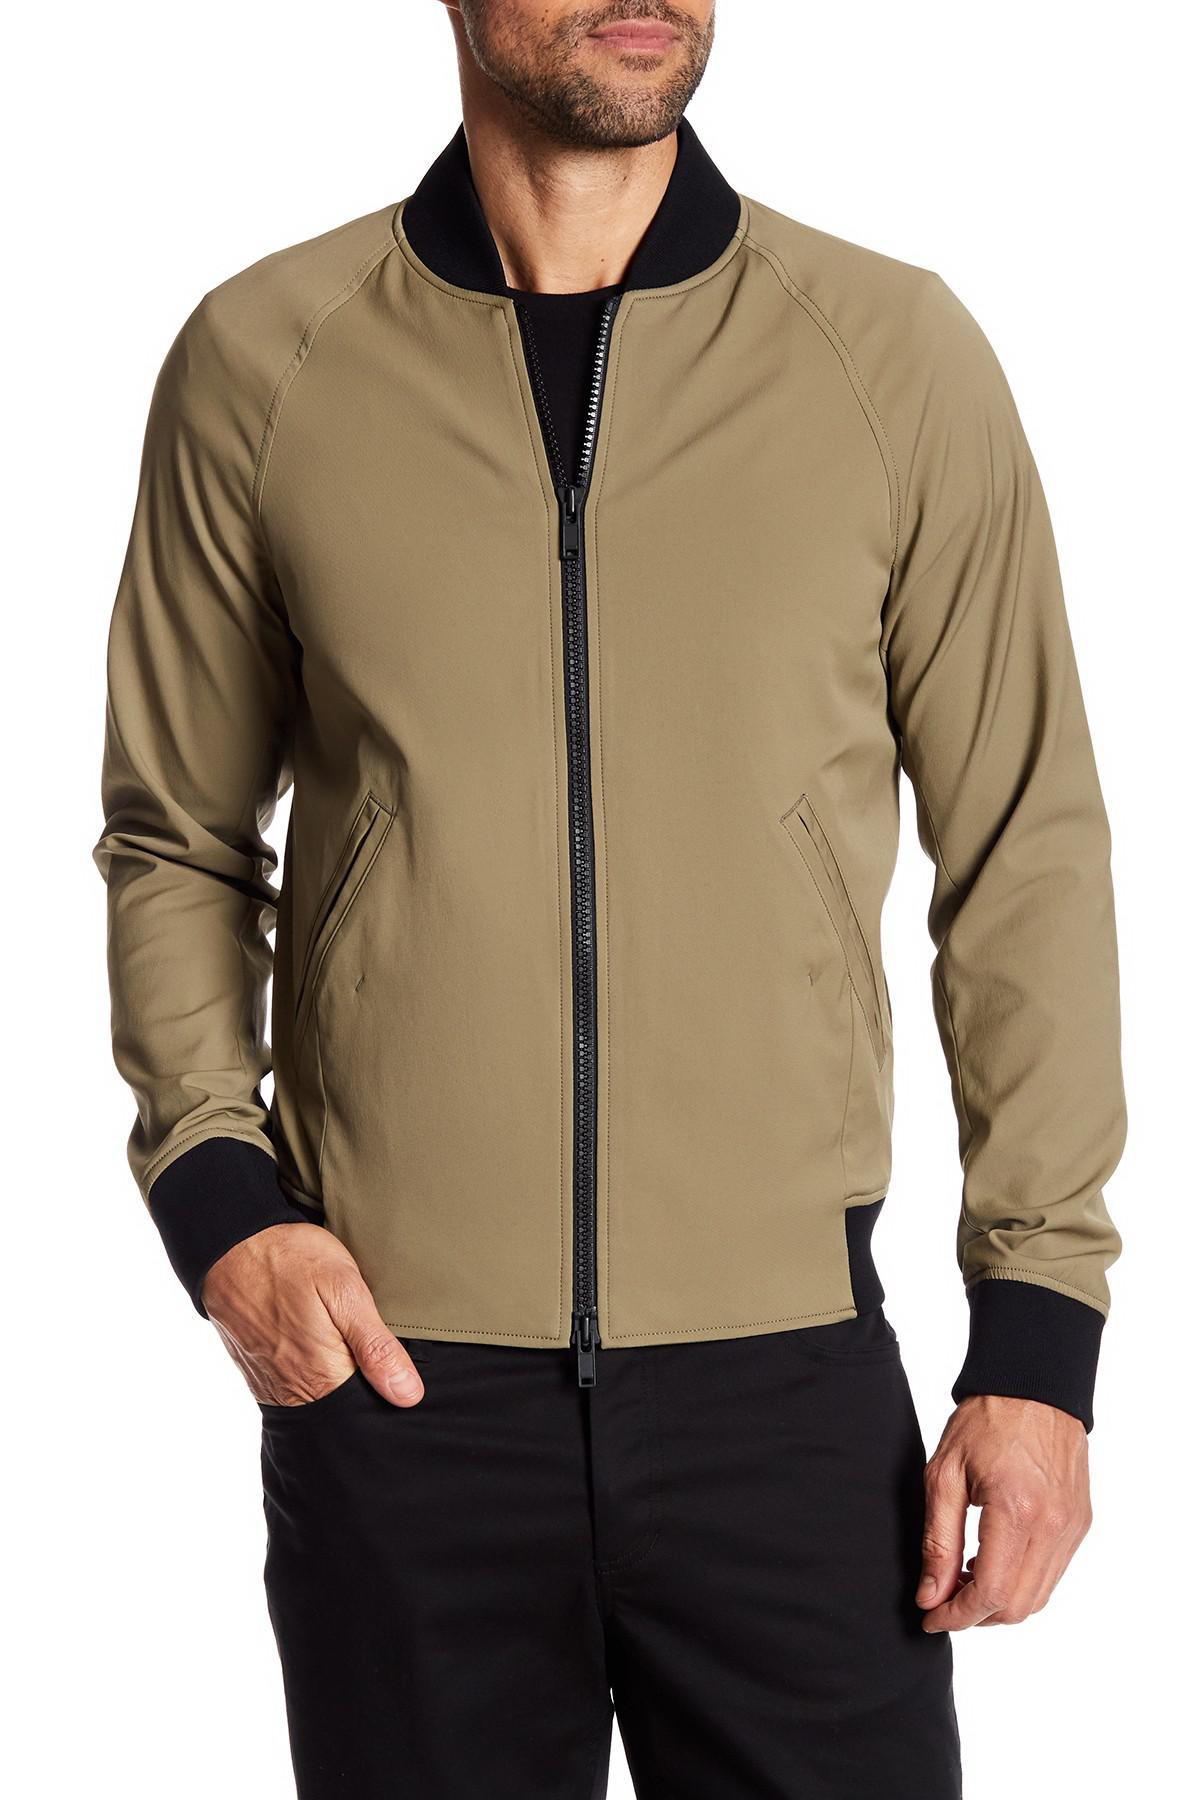 Lyst - Theory Bomber Jacket for Men